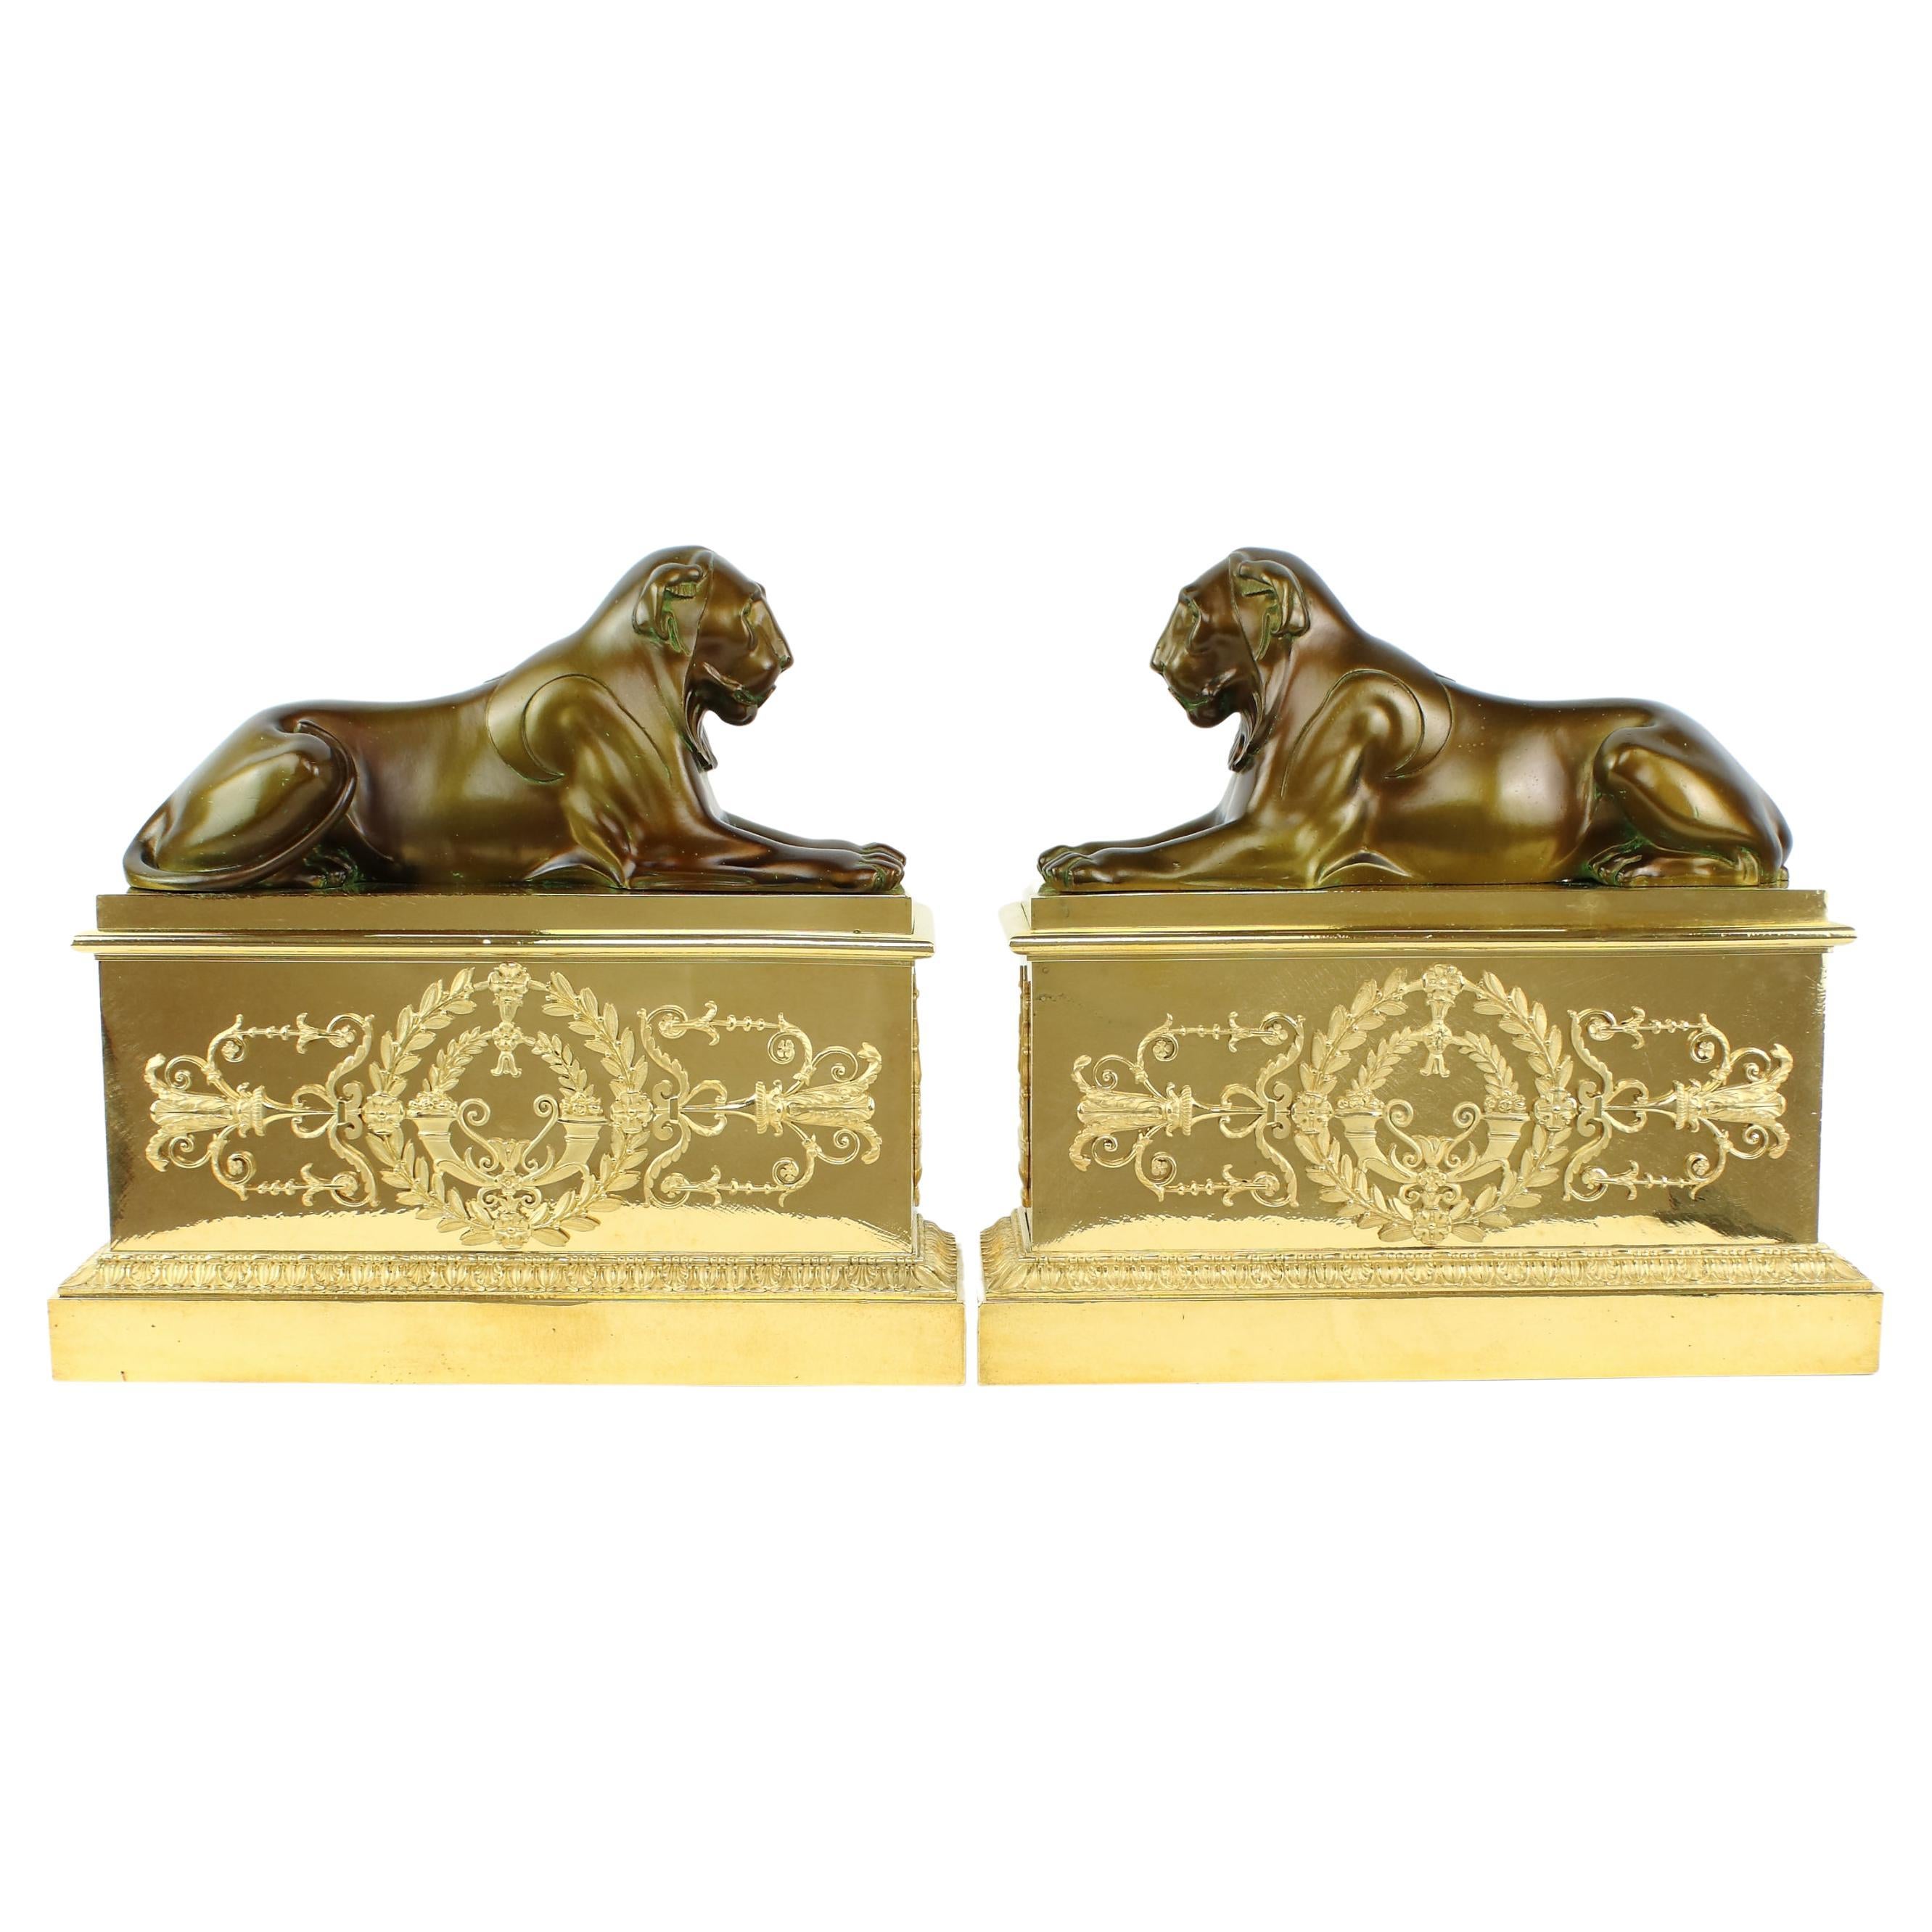 Early 19th Century French Empire Gilt Bronze Lioness Figures Andirons or Chenets